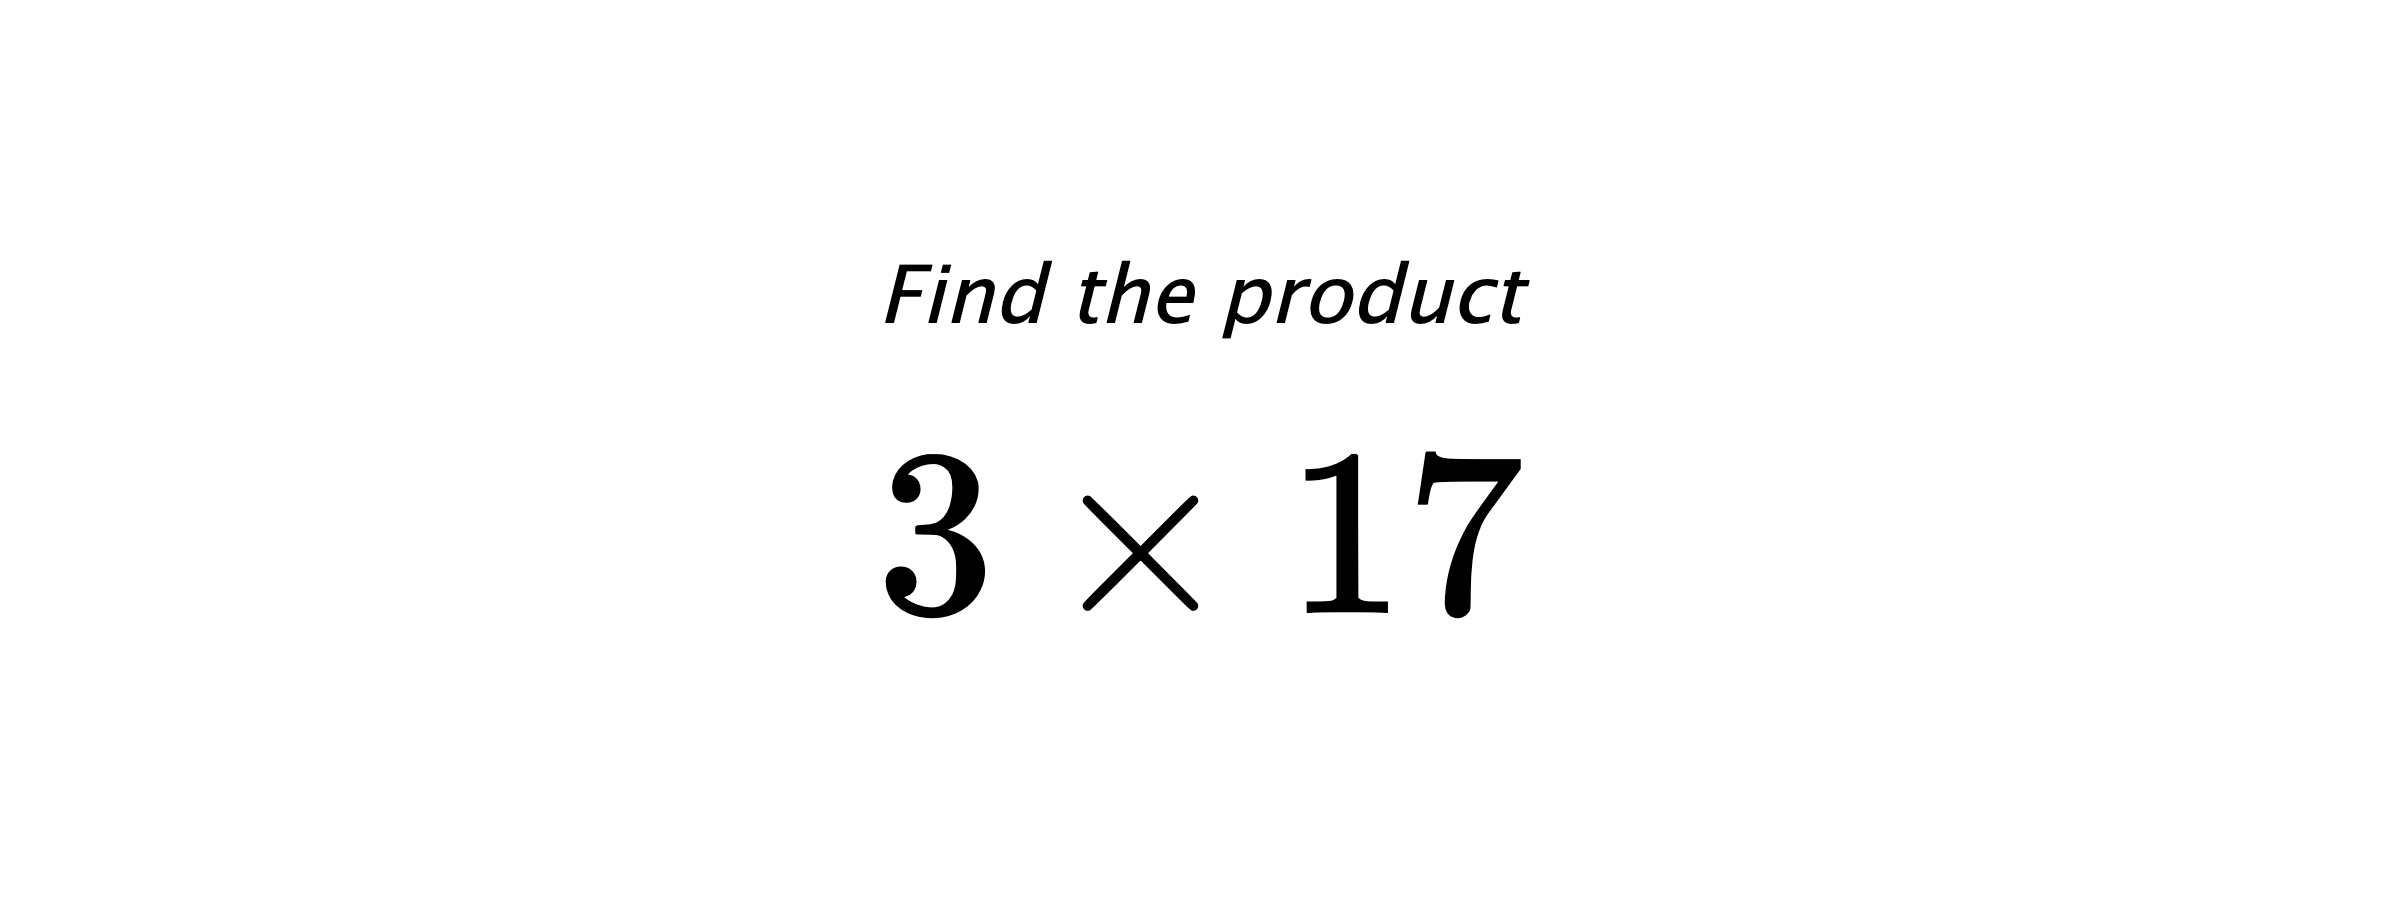 Find the product $ 3 \times 17 $